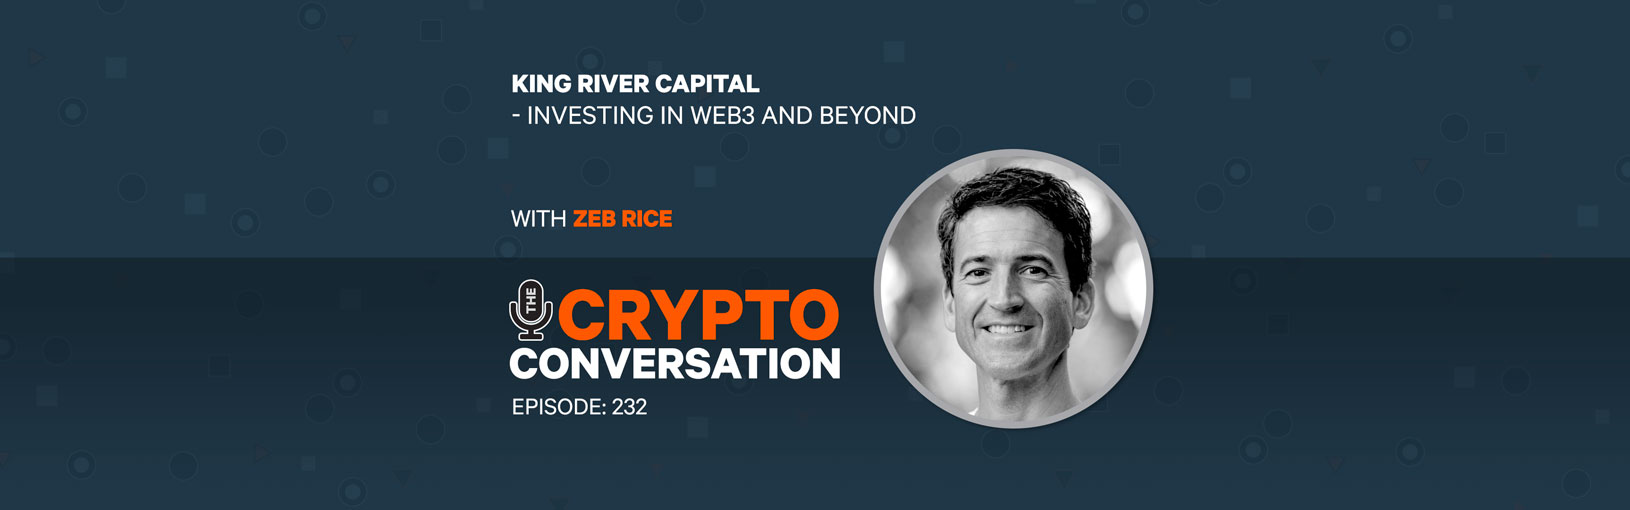 King River Capital – Investing in Web3 and beyond